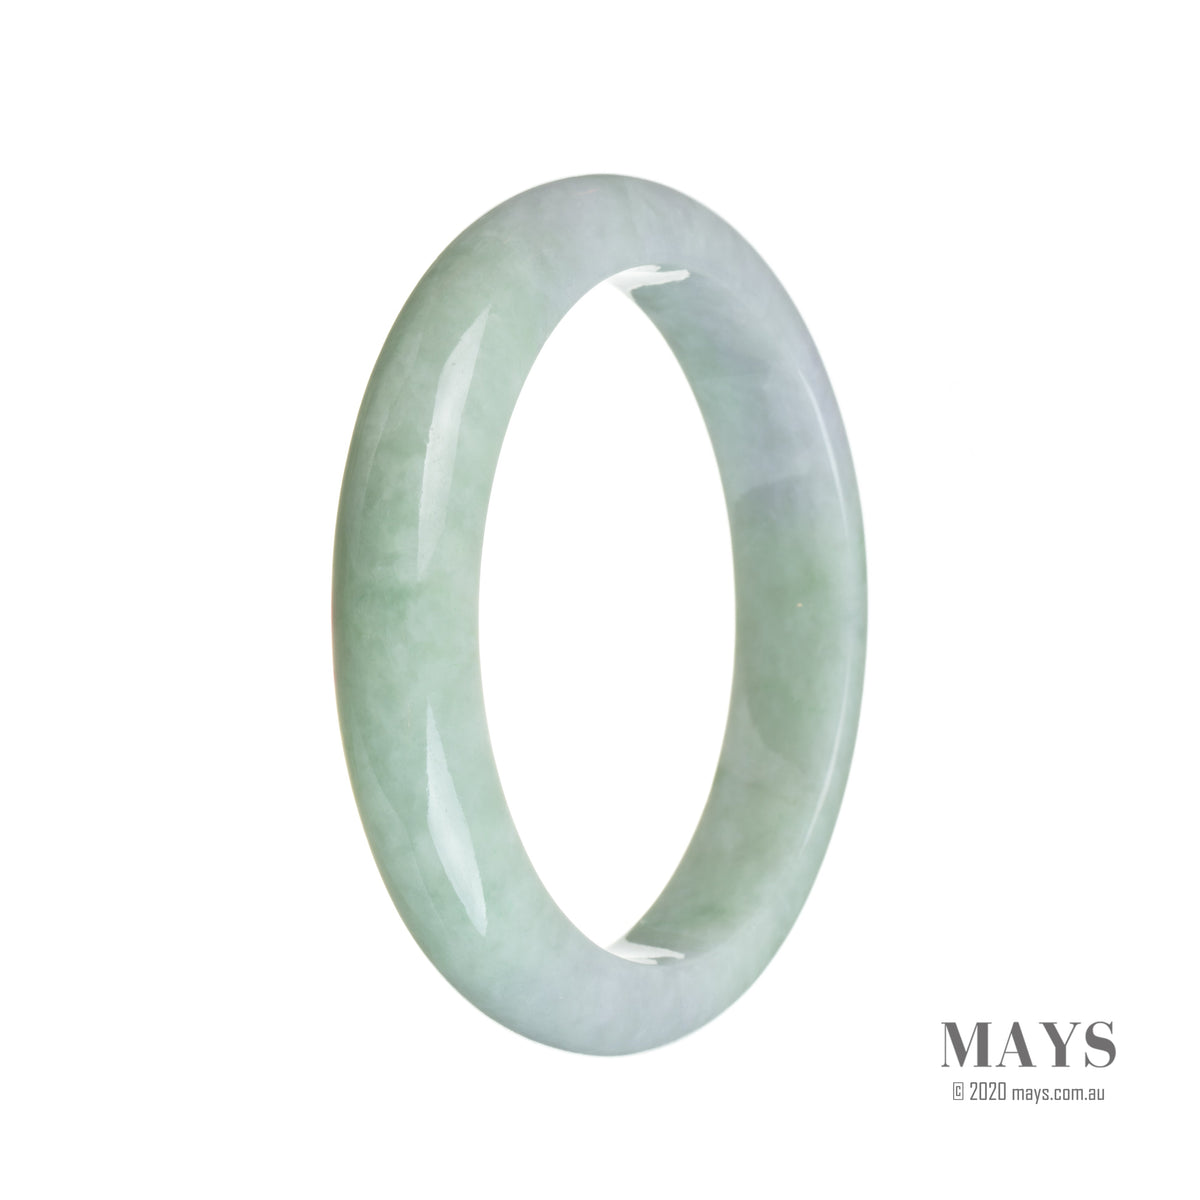 Close-up of a lavender-colored bangle bracelet made with certified natural Burmese Jade stone. The bracelet has a semi-round shape and measures 57mm in size. The jade stone is a vibrant green, adding a touch of elegance to the lavender bracelet. Perfect for adding a pop of color to any outfit.